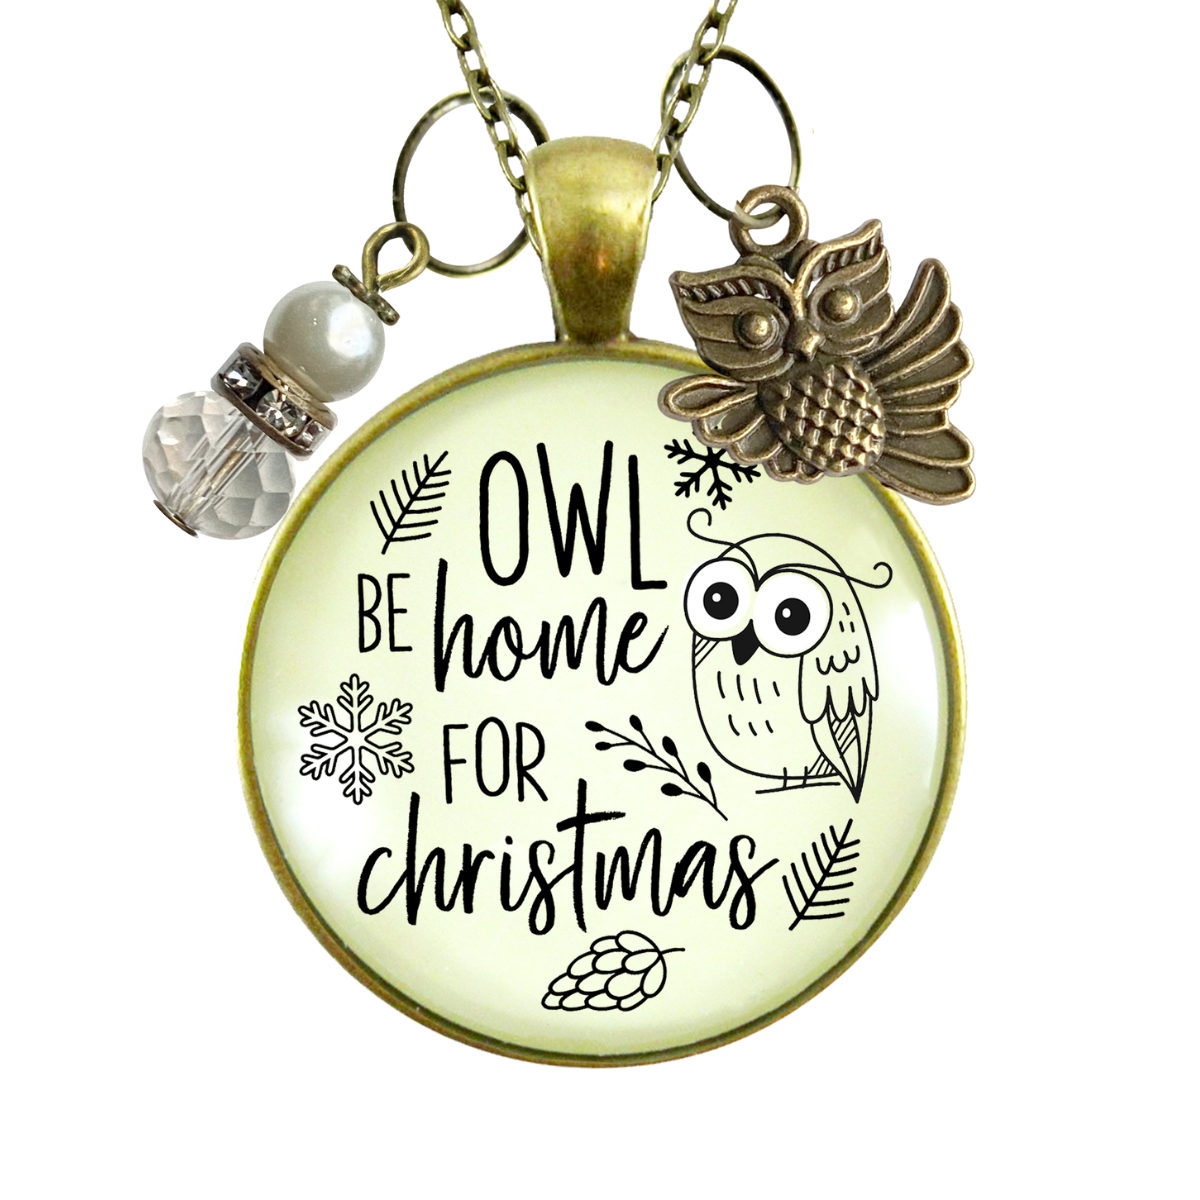 Christmas Charm Necklace Owl Be Home Holiday Pine Cone Charm Handmade Pendant White Winter Jewelry Gift  Necklace - Gutsy Goodness Handmade Jewelry